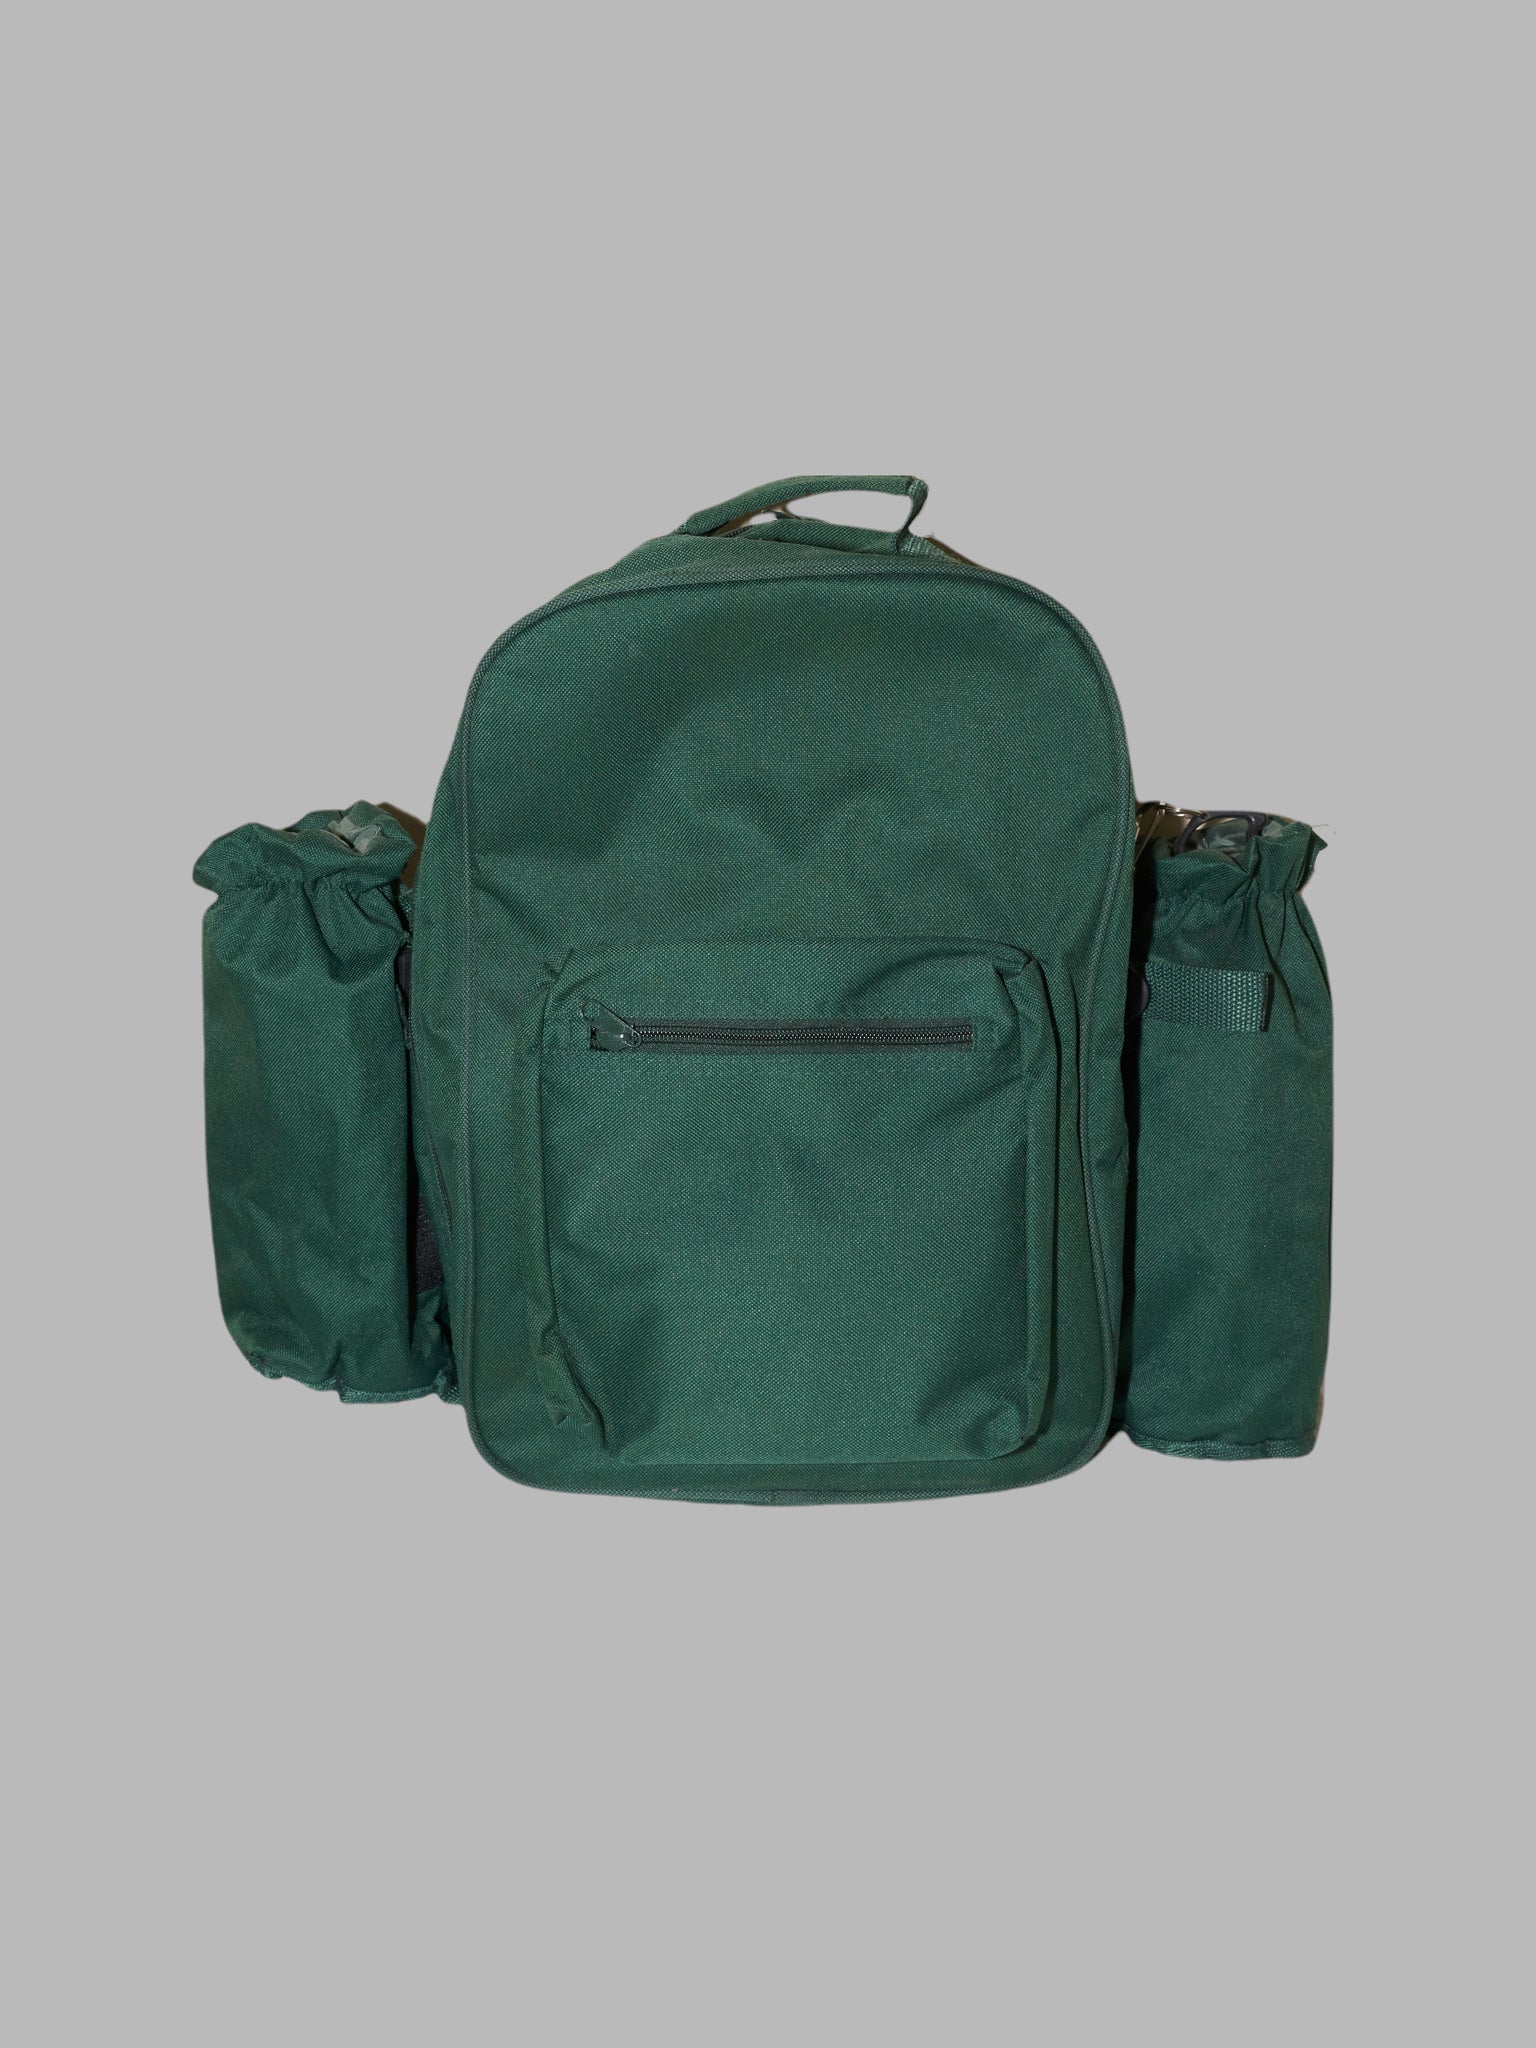 Green canvas “Lt Legal innovation and tech fest” backpack with full picnic set